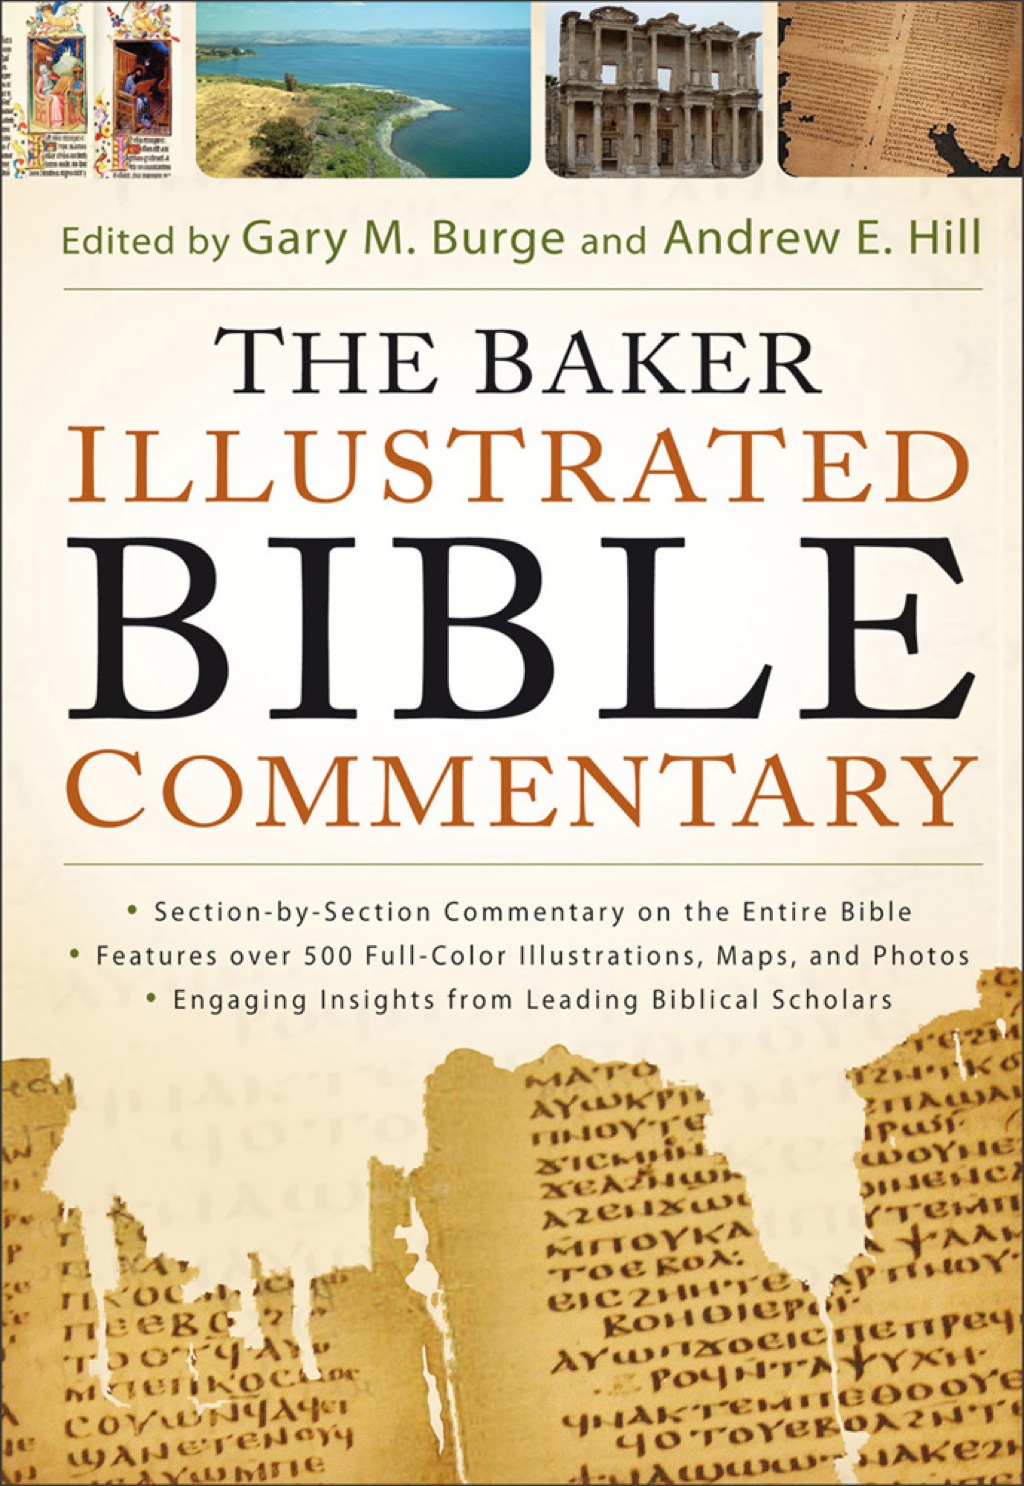 The Baker Illustrated Bible Commentary (eBook) - Gary M. Burge,